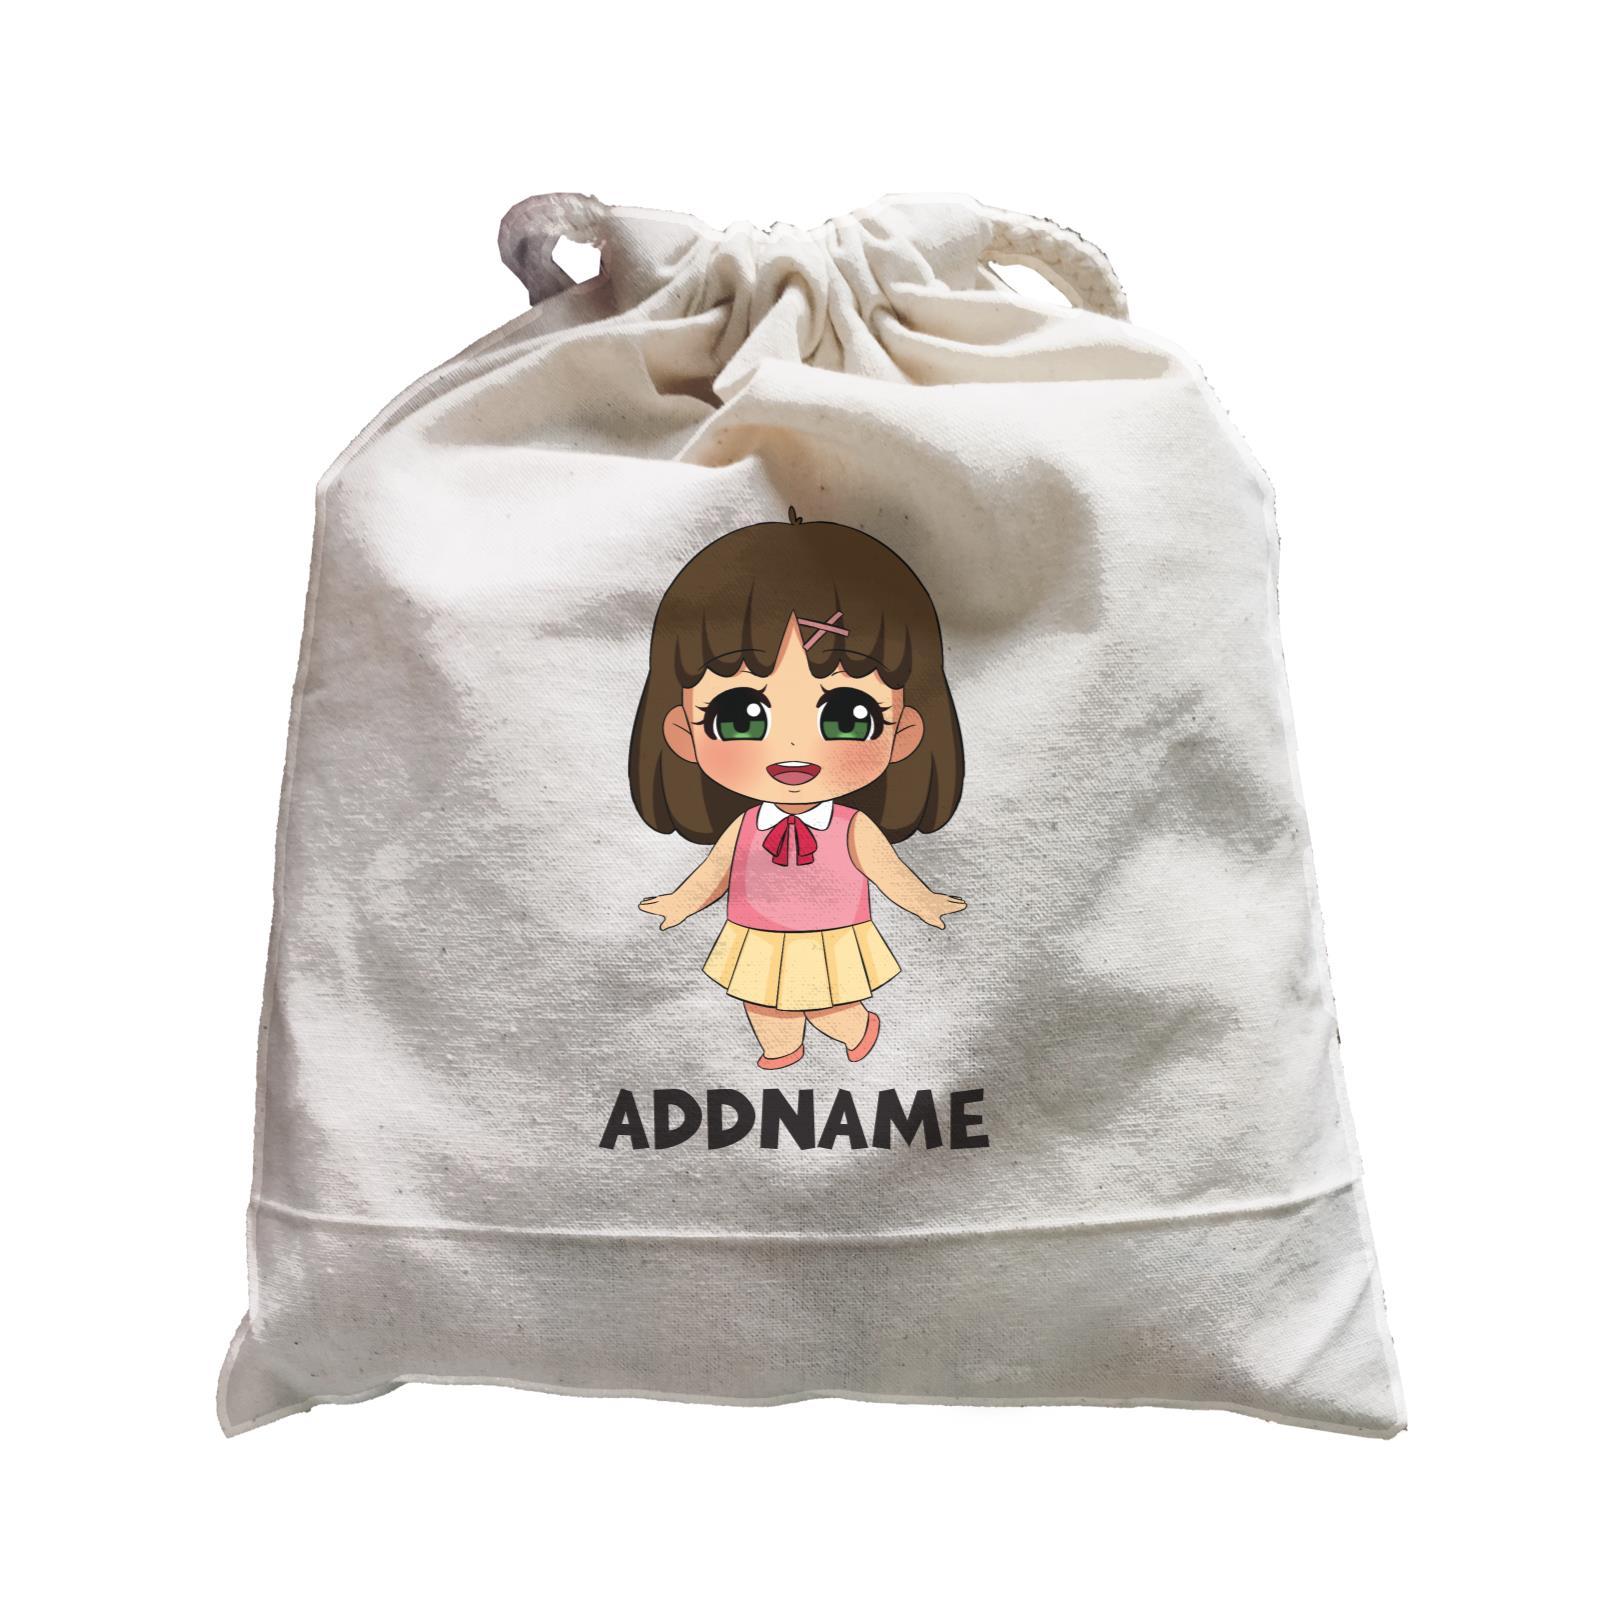 Children's Day Gift Series Little Chinese Girl Addname  Satchel